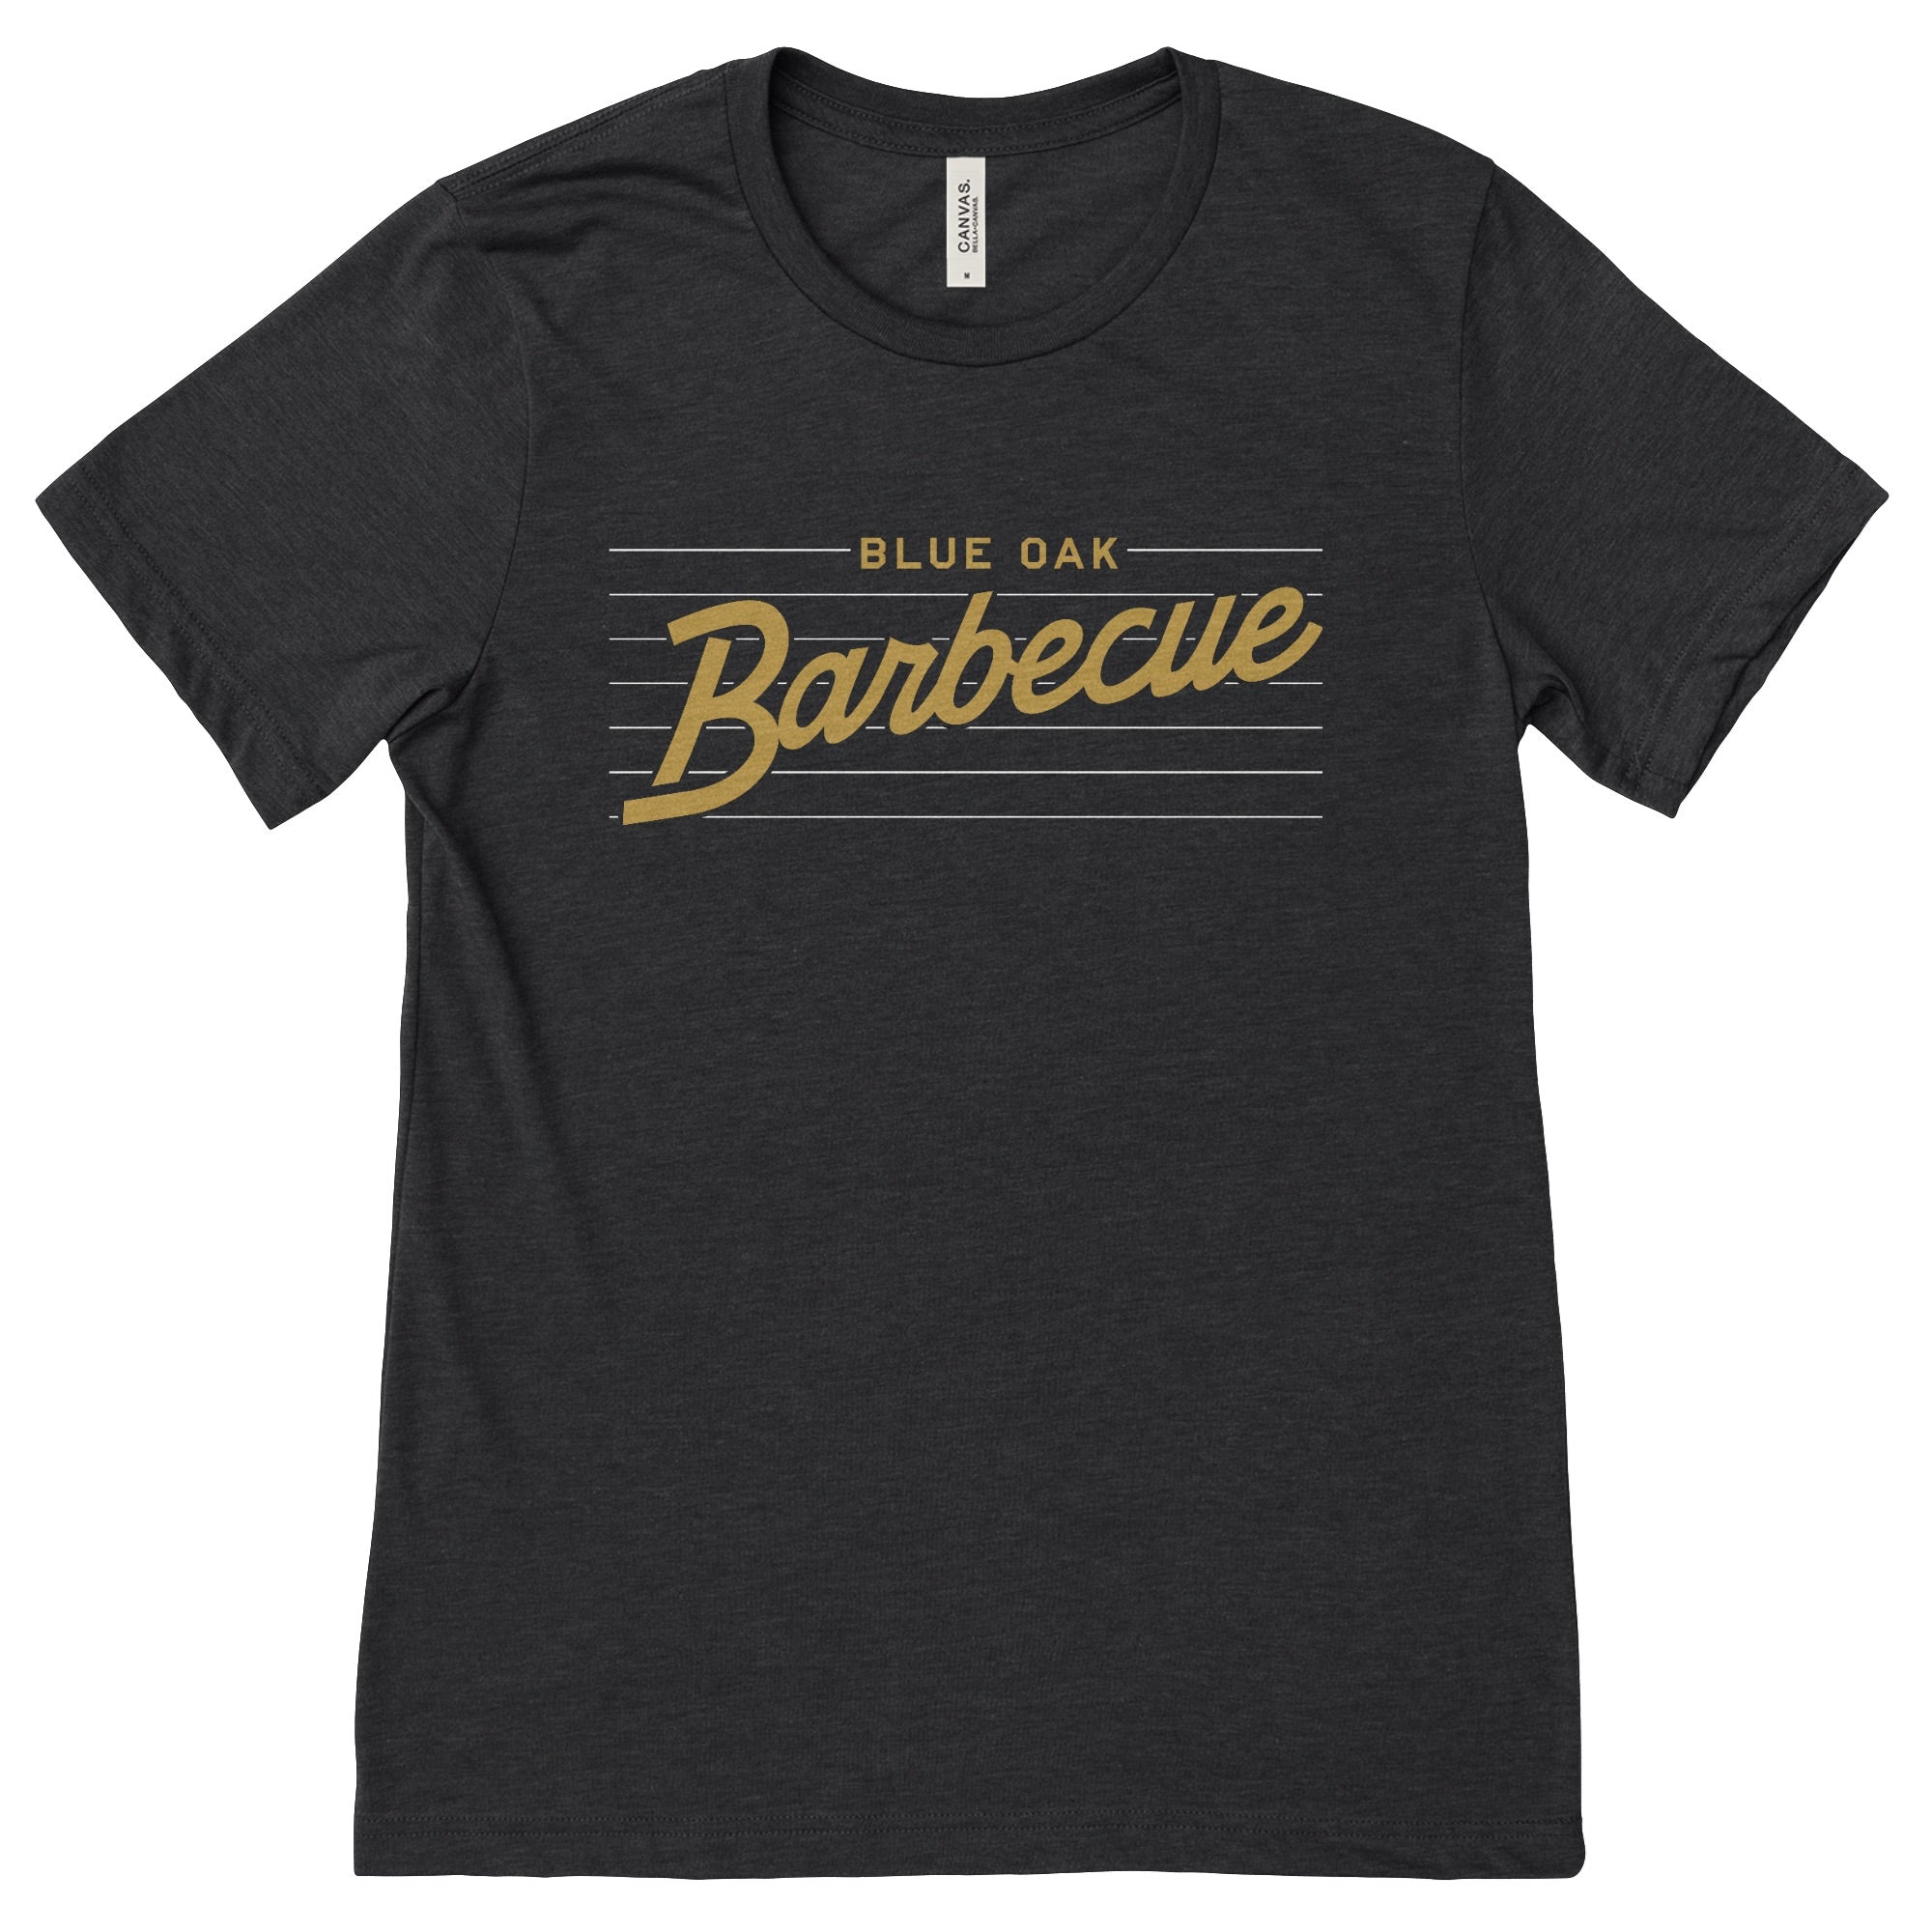 Black and Gold Barbecue Tee